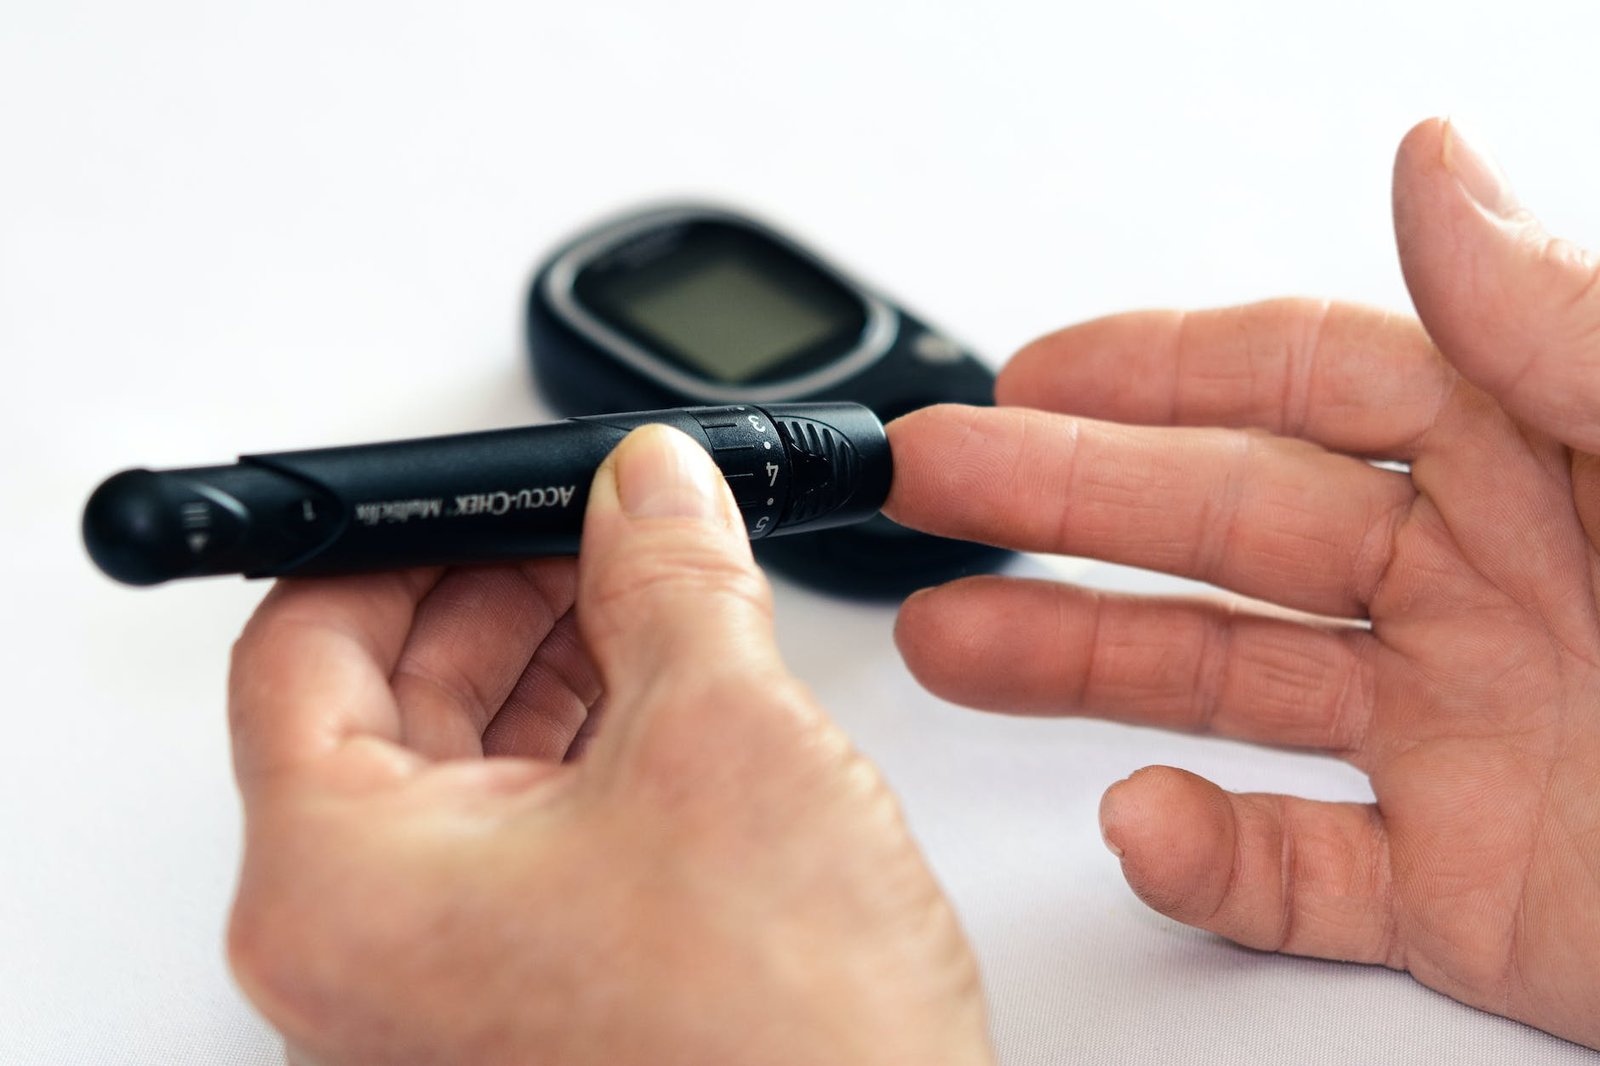 Diabetes is a serious condition that requires proper management.